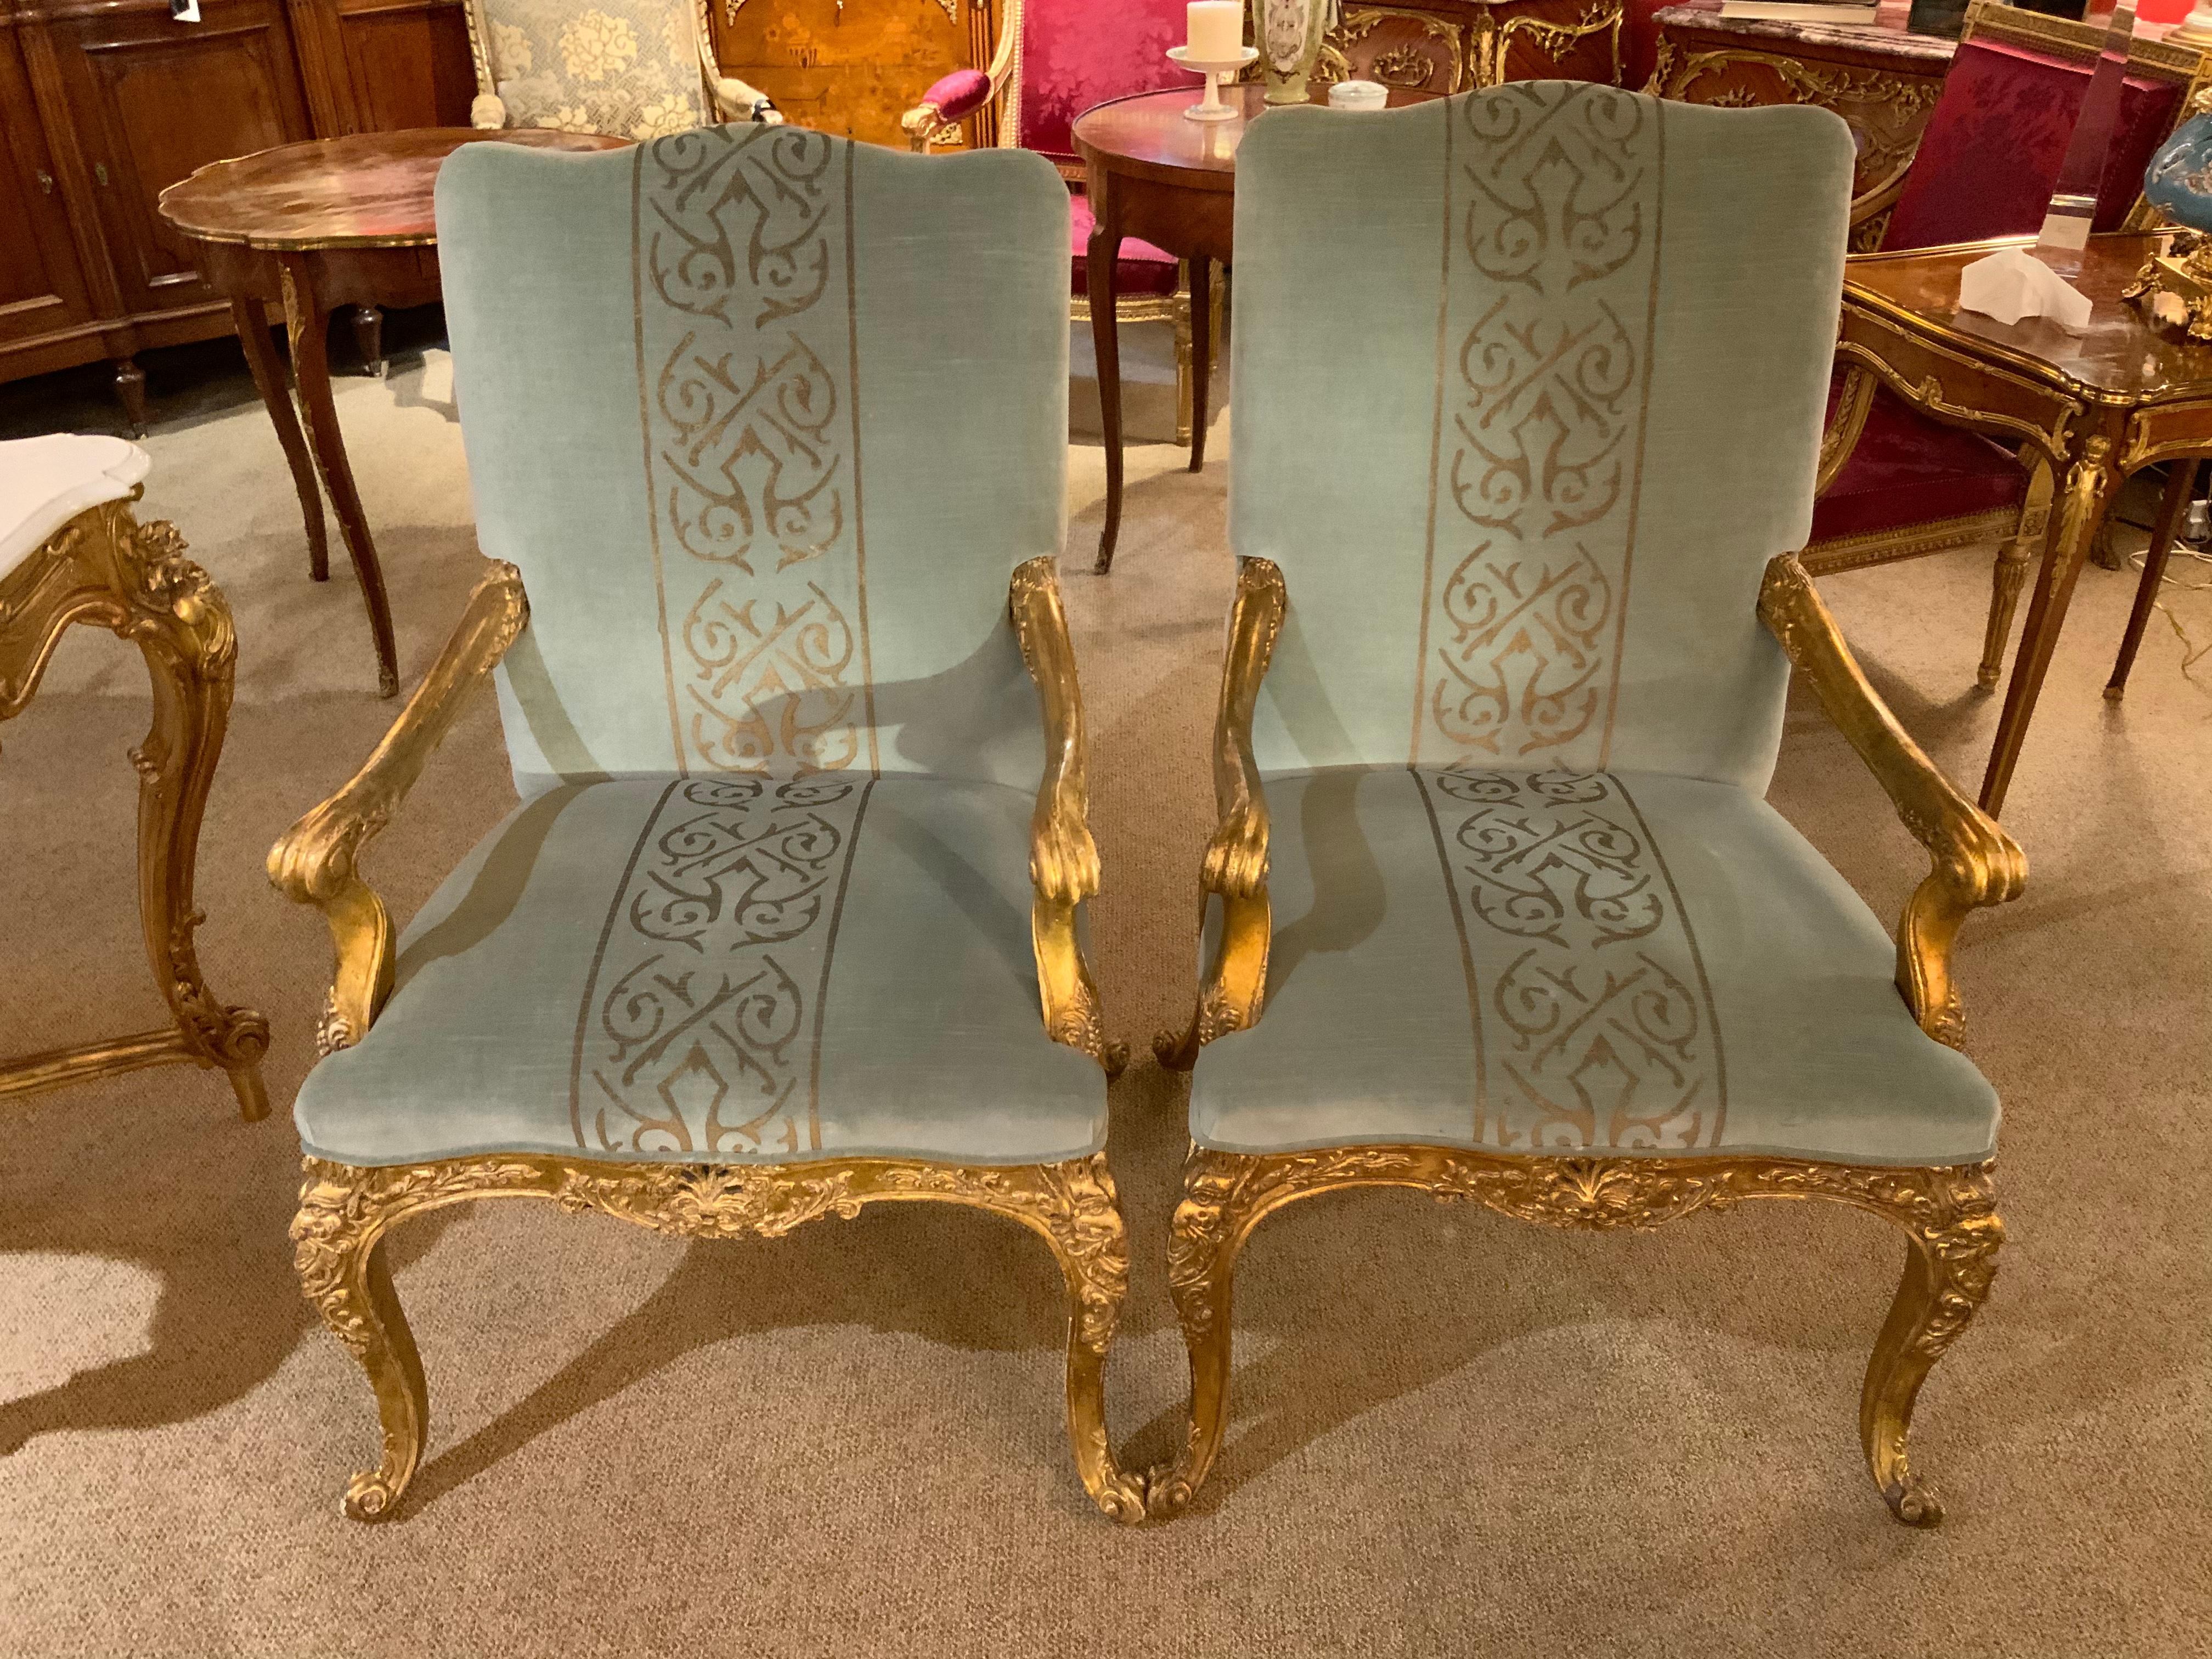 Pair of Giltwood Arm Chairs, Louis XV-Style Upholstered in Pale Aqua Blue /Gold 1